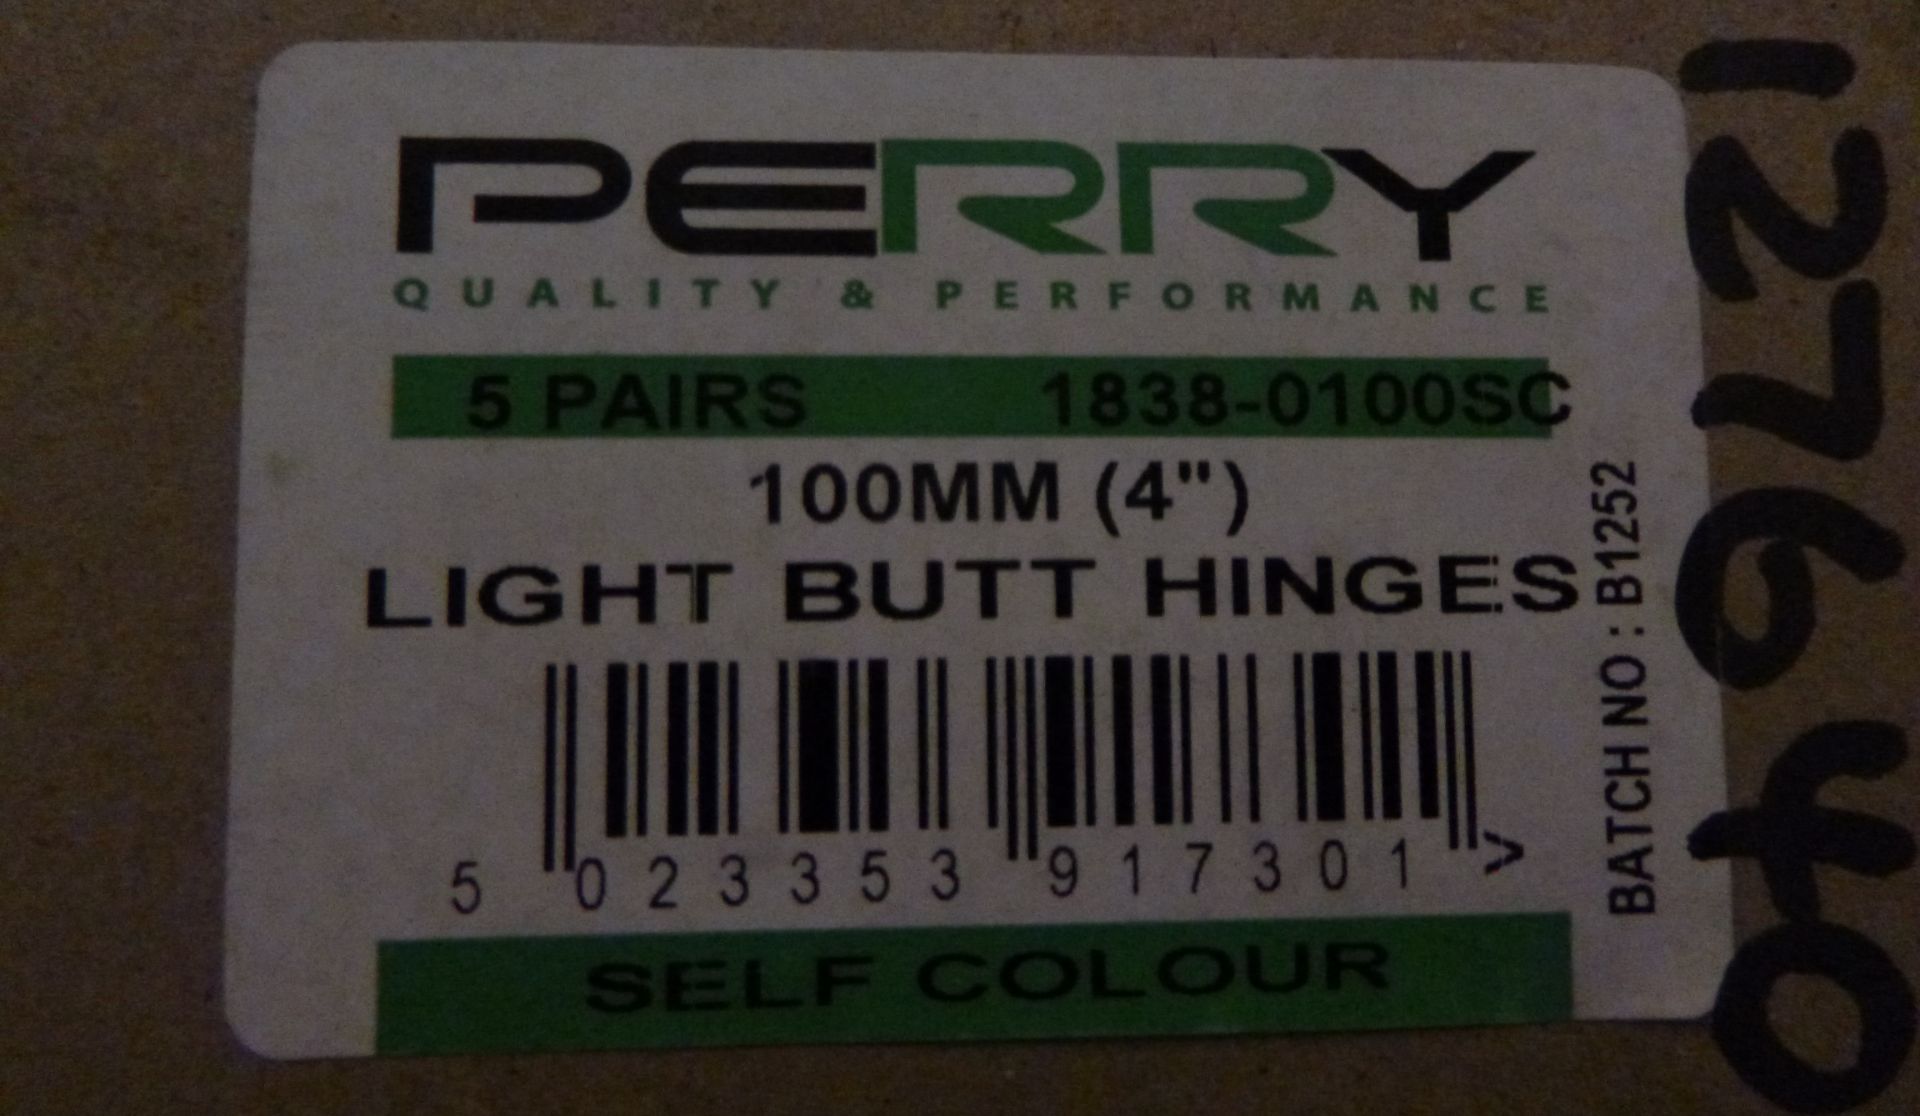 3 x Pack of 40 Perry&trade; 100mm 4" No.1838 Light Butt Hinges | EAN: 5023353917301 | RRP £141 - Bild 2 aus 2